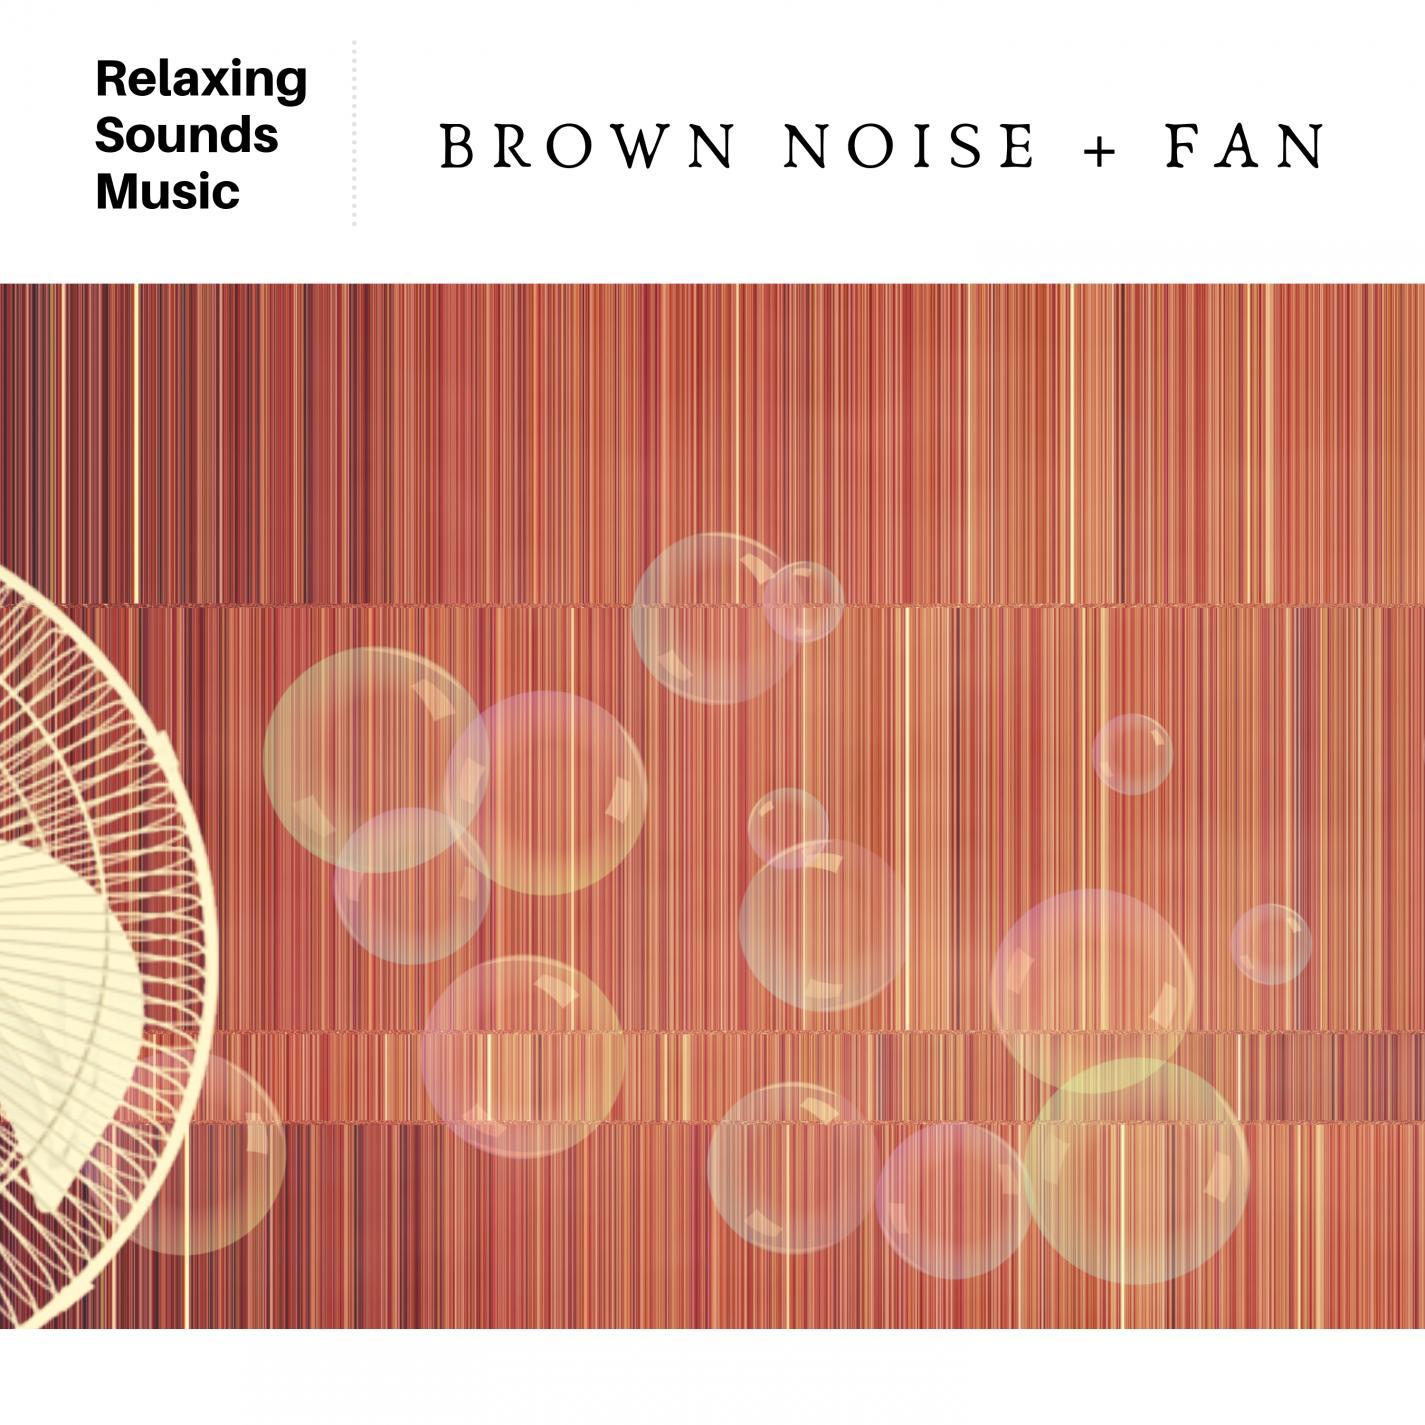 The Brown Noise Sound Effects